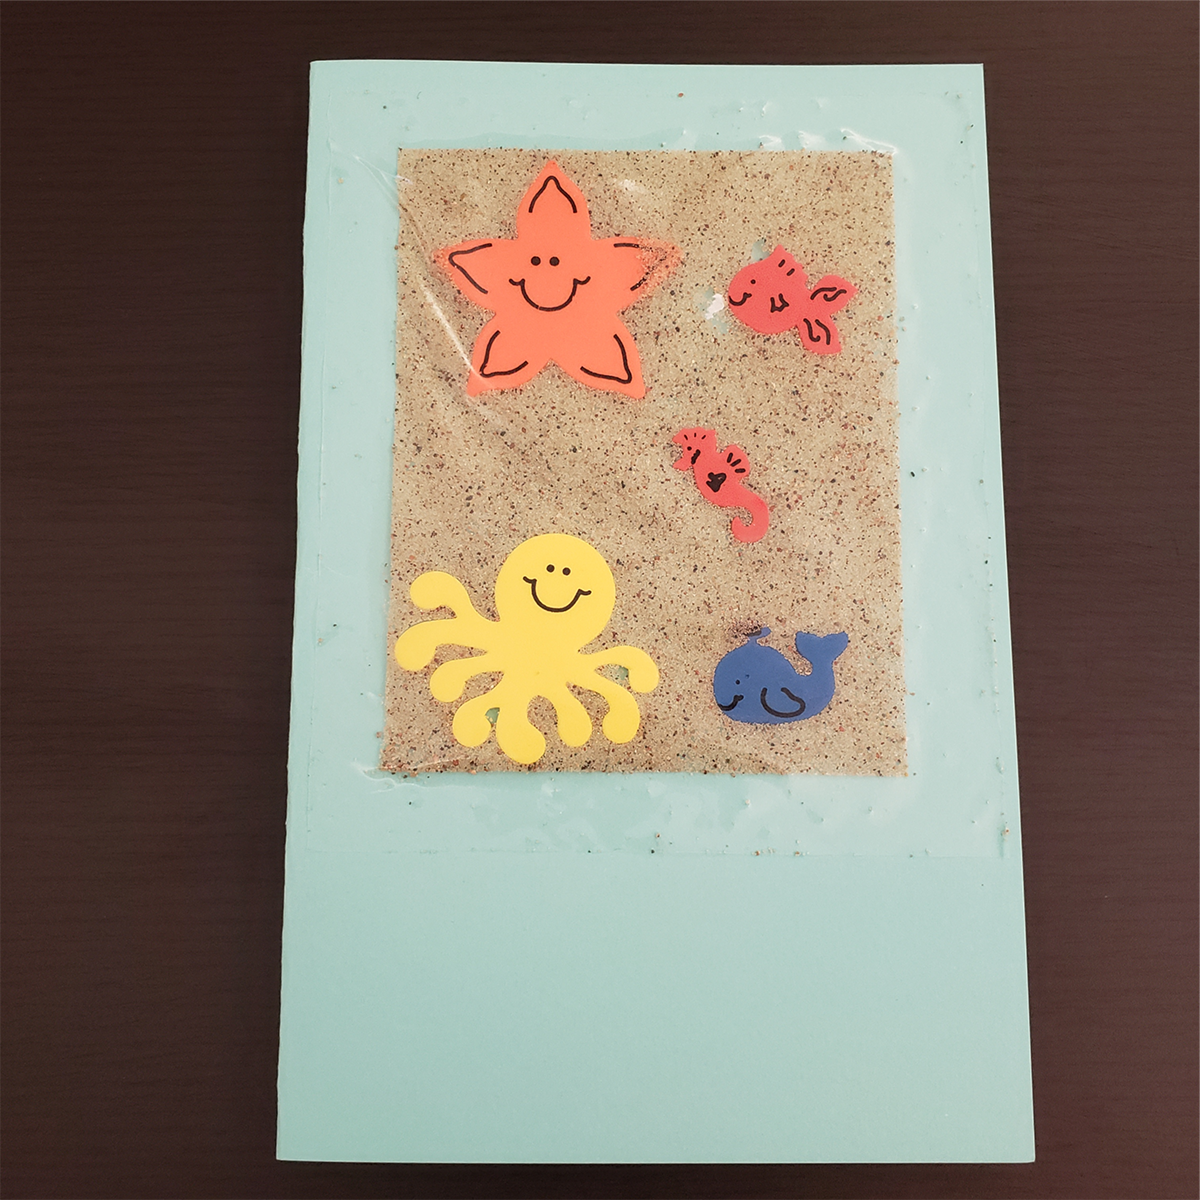 A beach greeting card: a rectangular folded paper, decorated with sandpaper and cutout shapes of sea creatures